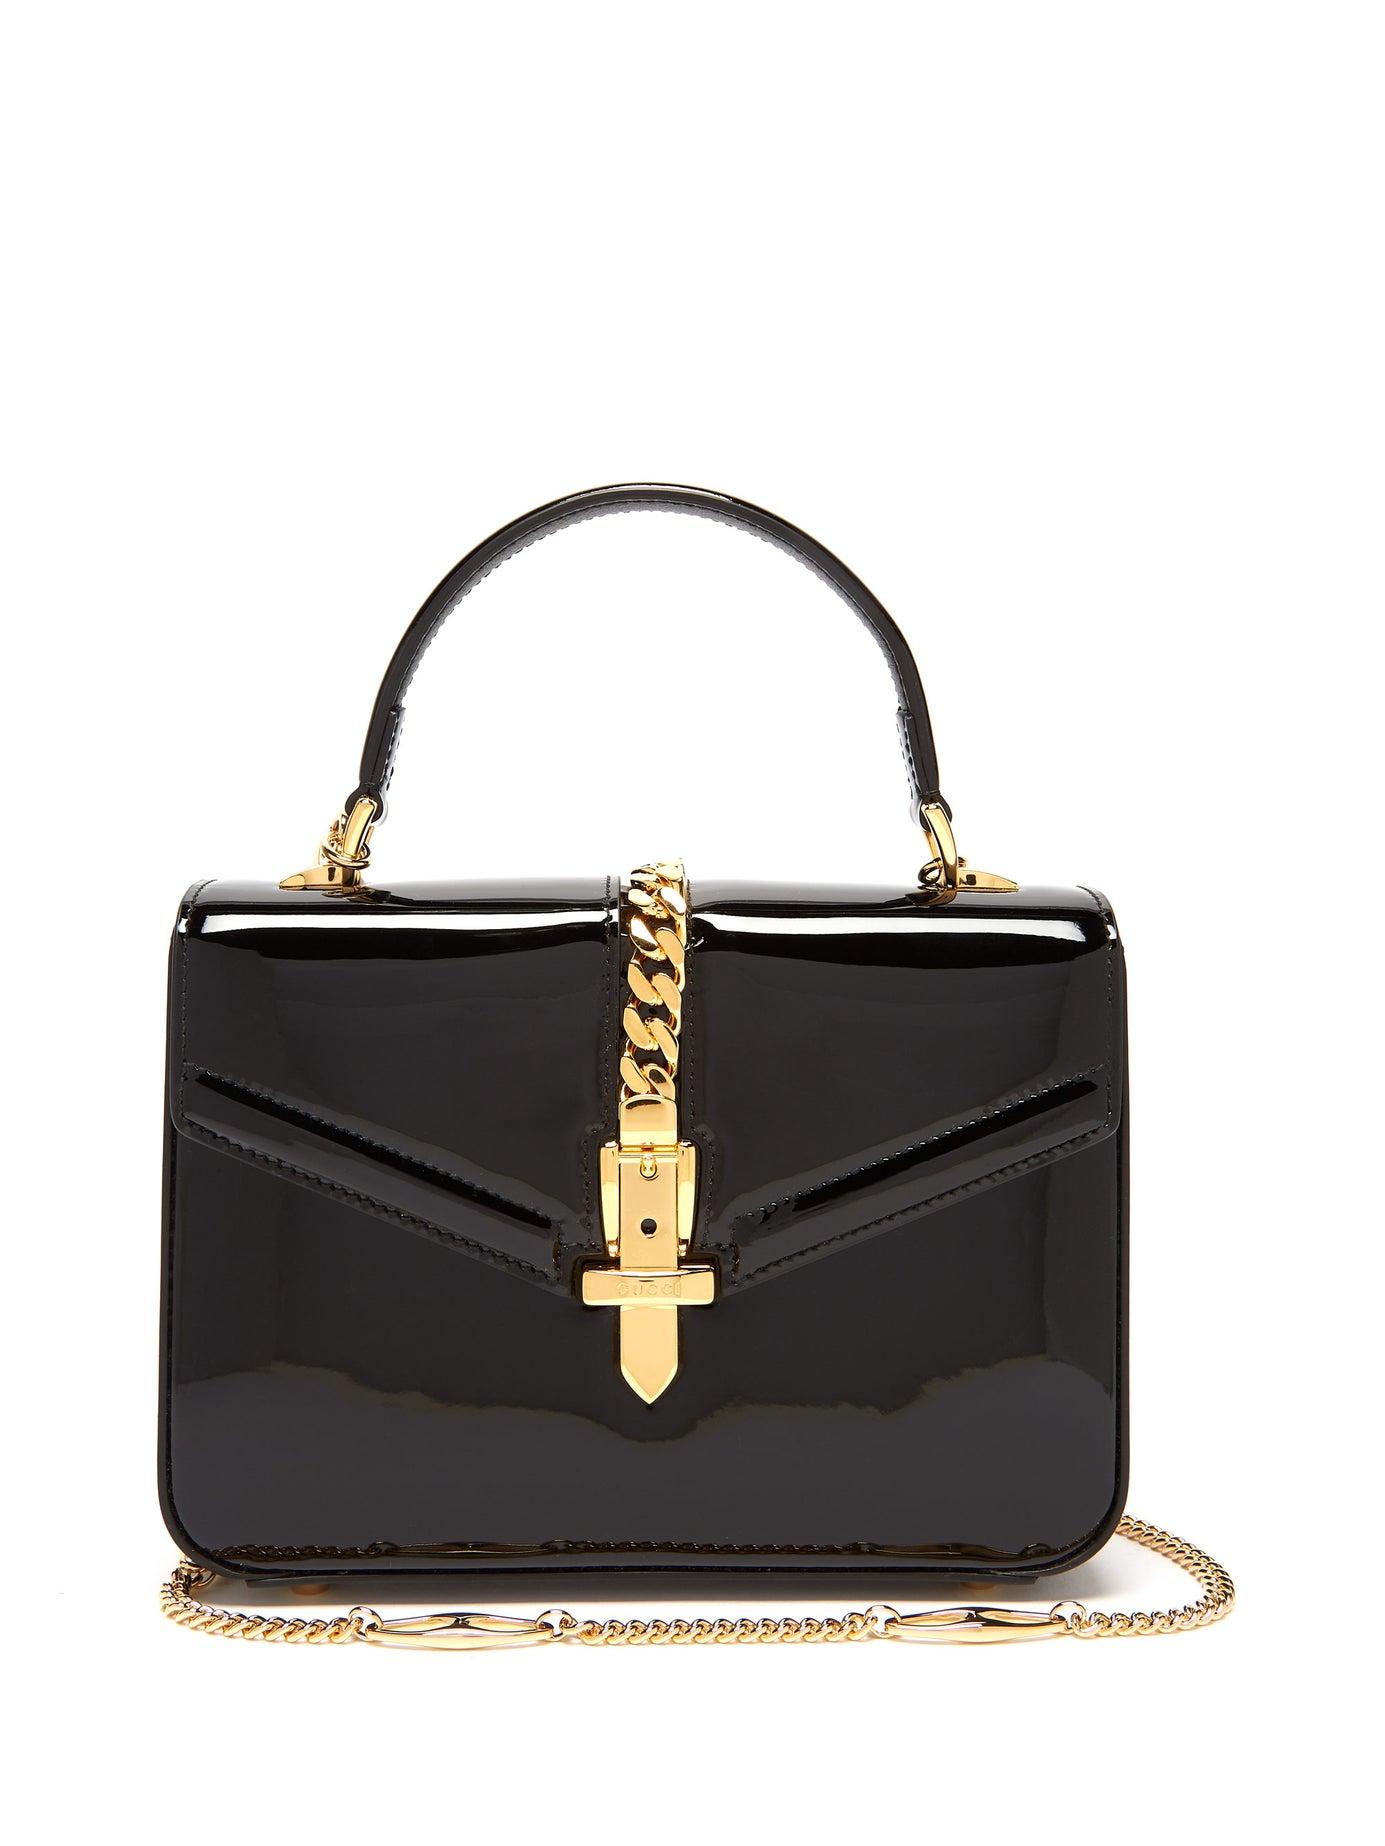 Gucci Sylvie 1969 Mini Patent-leather Shoulder Bag in Black - Lyst